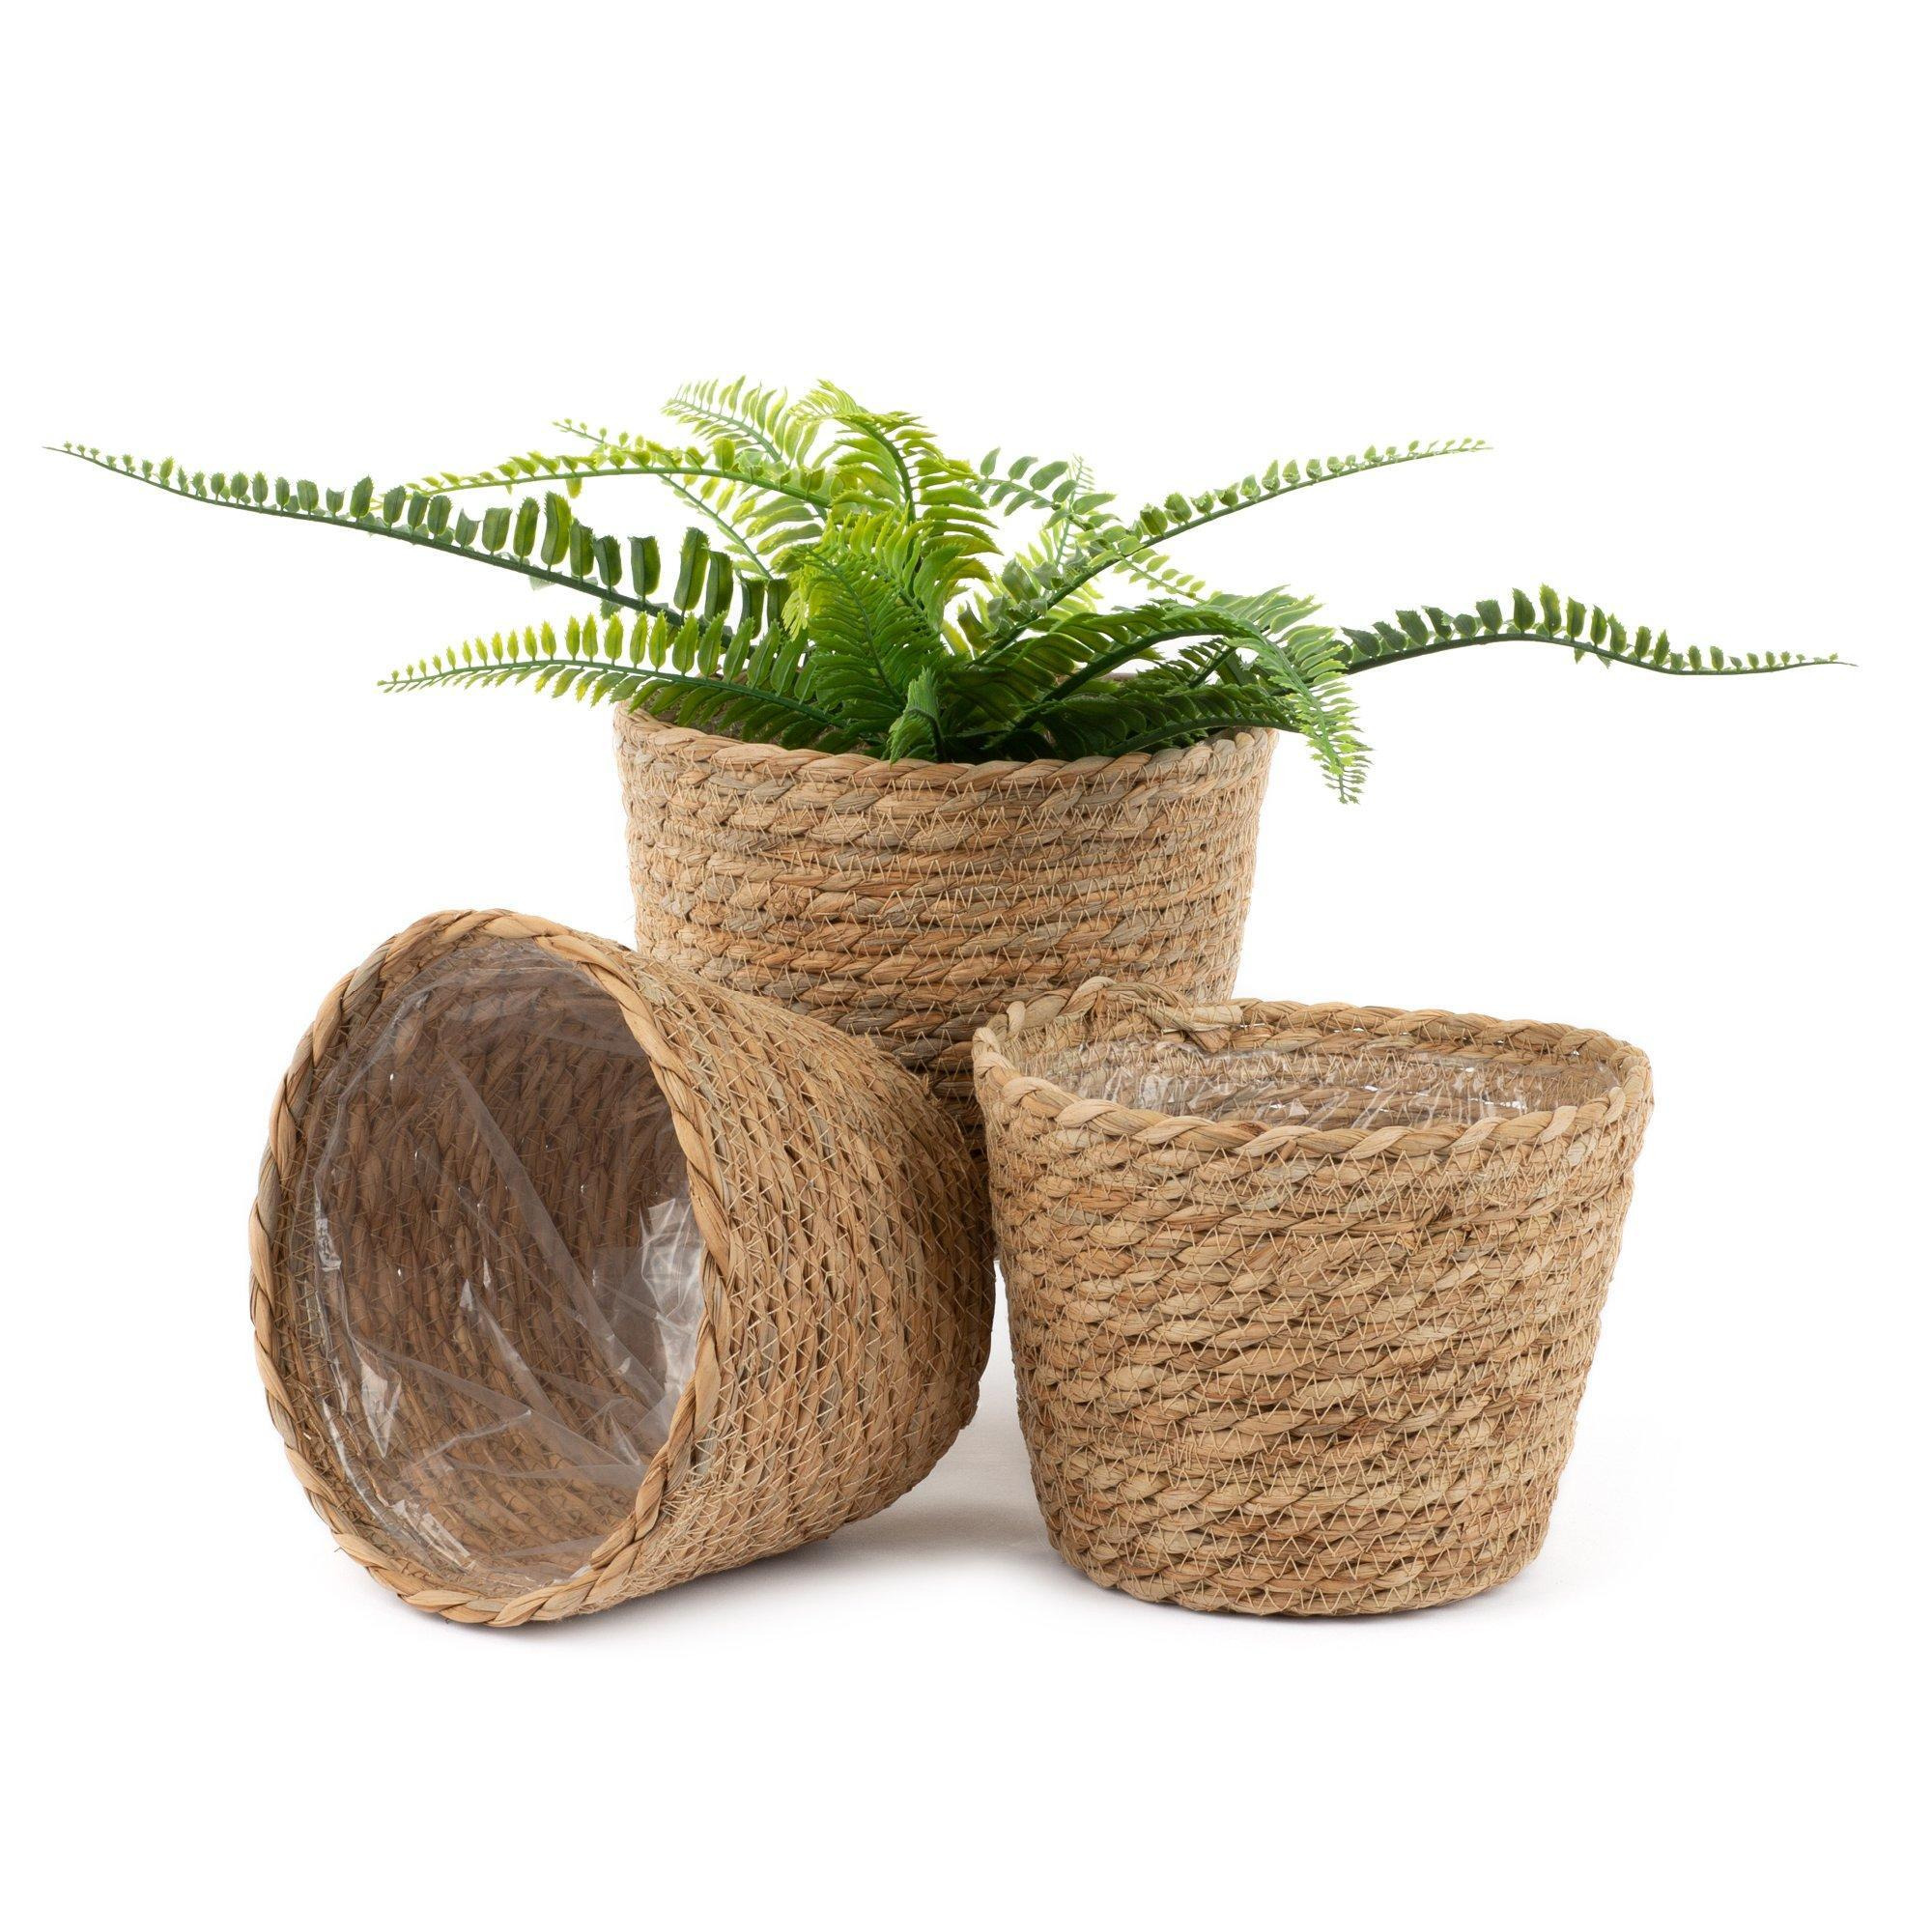 Handwoven Seagrass Flower Plant Pots - Set of 3 - image 1